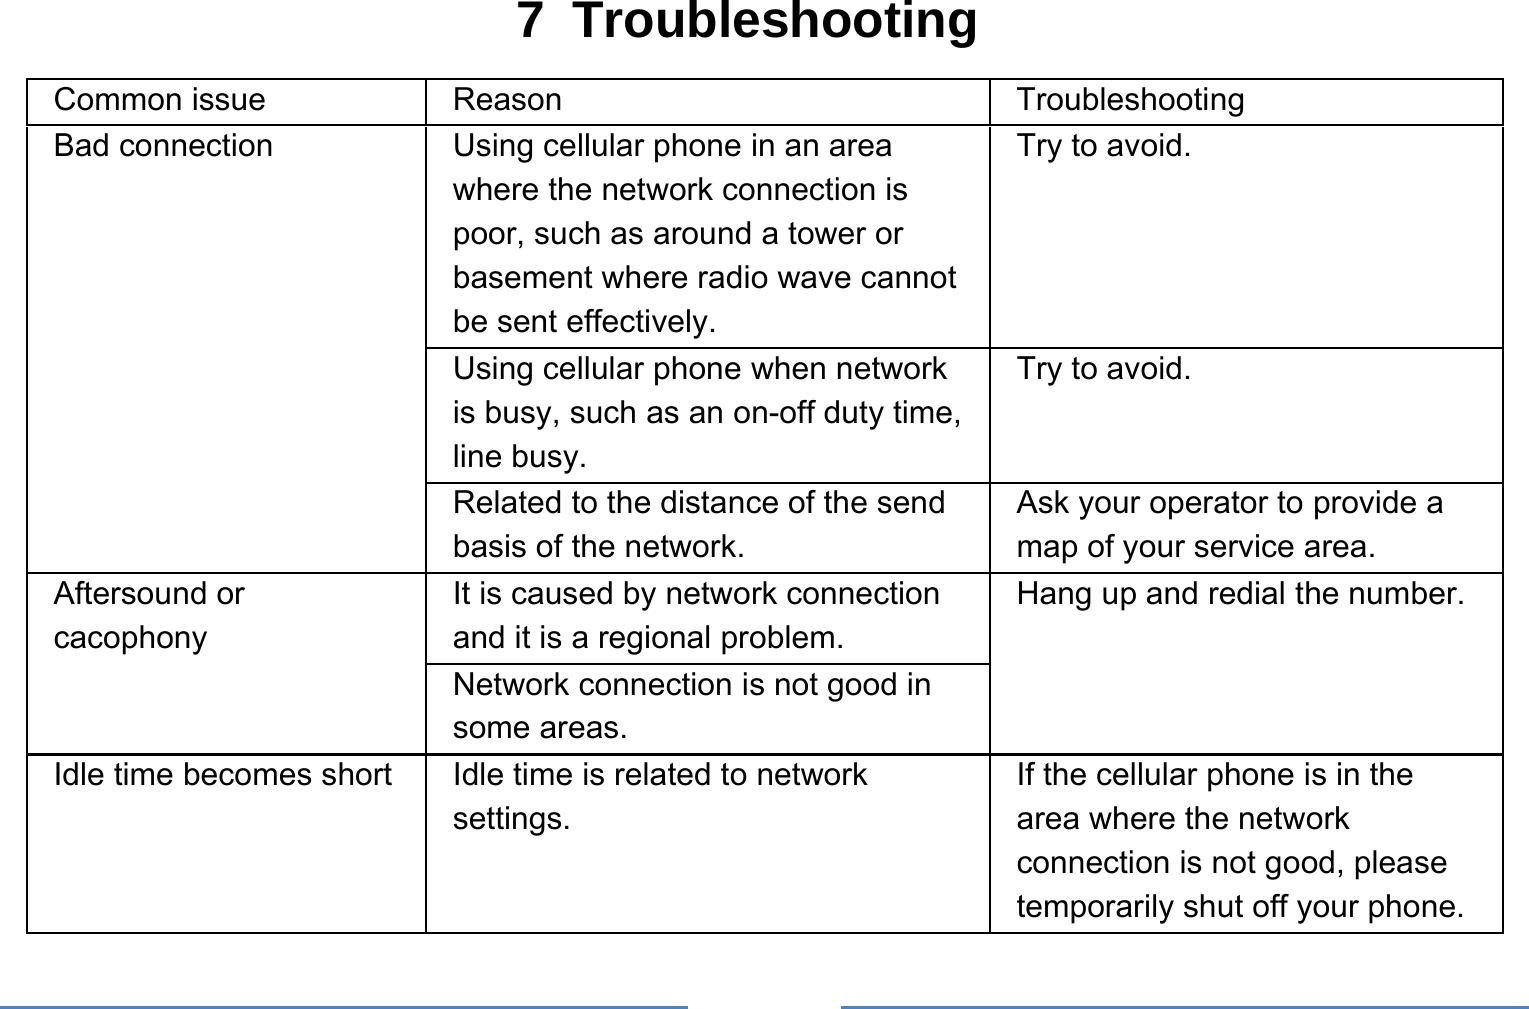     7 Troubleshooting Common issue  Reason  Troubleshooting Bad connection  Using cellular phone in an area where the network connection is poor, such as around a tower or basement where radio wave cannot be sent effectively.   Try to avoid. Using cellular phone when network is busy, such as an on-off duty time, line busy. Try to avoid. Related to the distance of the send basis of the network. Ask your operator to provide a map of your service area. Aftersound or cacophony It is caused by network connection and it is a regional problem. Hang up and redial the number. Network connection is not good in some areas. Idle time becomes short  Idle time is related to network settings. If the cellular phone is in the area where the network connection is not good, please temporarily shut off your phone. 